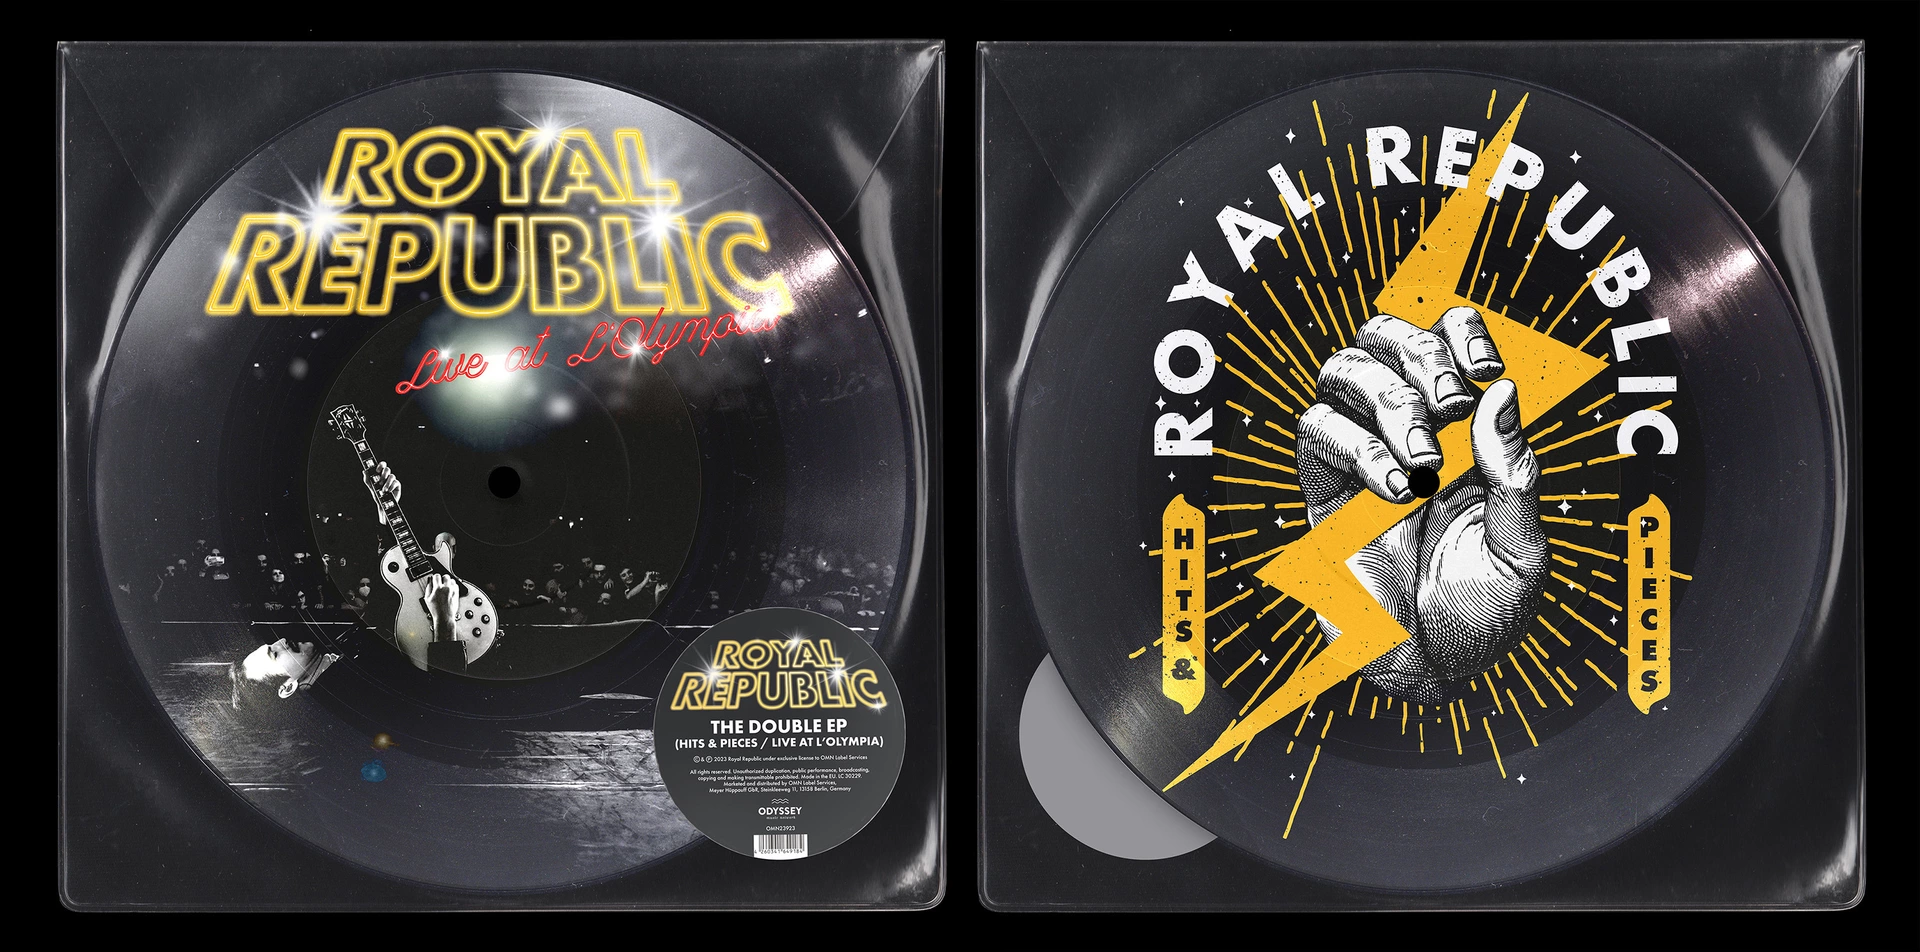 ROYAL REPUBLIC - The Double EP (Hits & Pieces / Live at l'Olympia) [PICTURE LP]